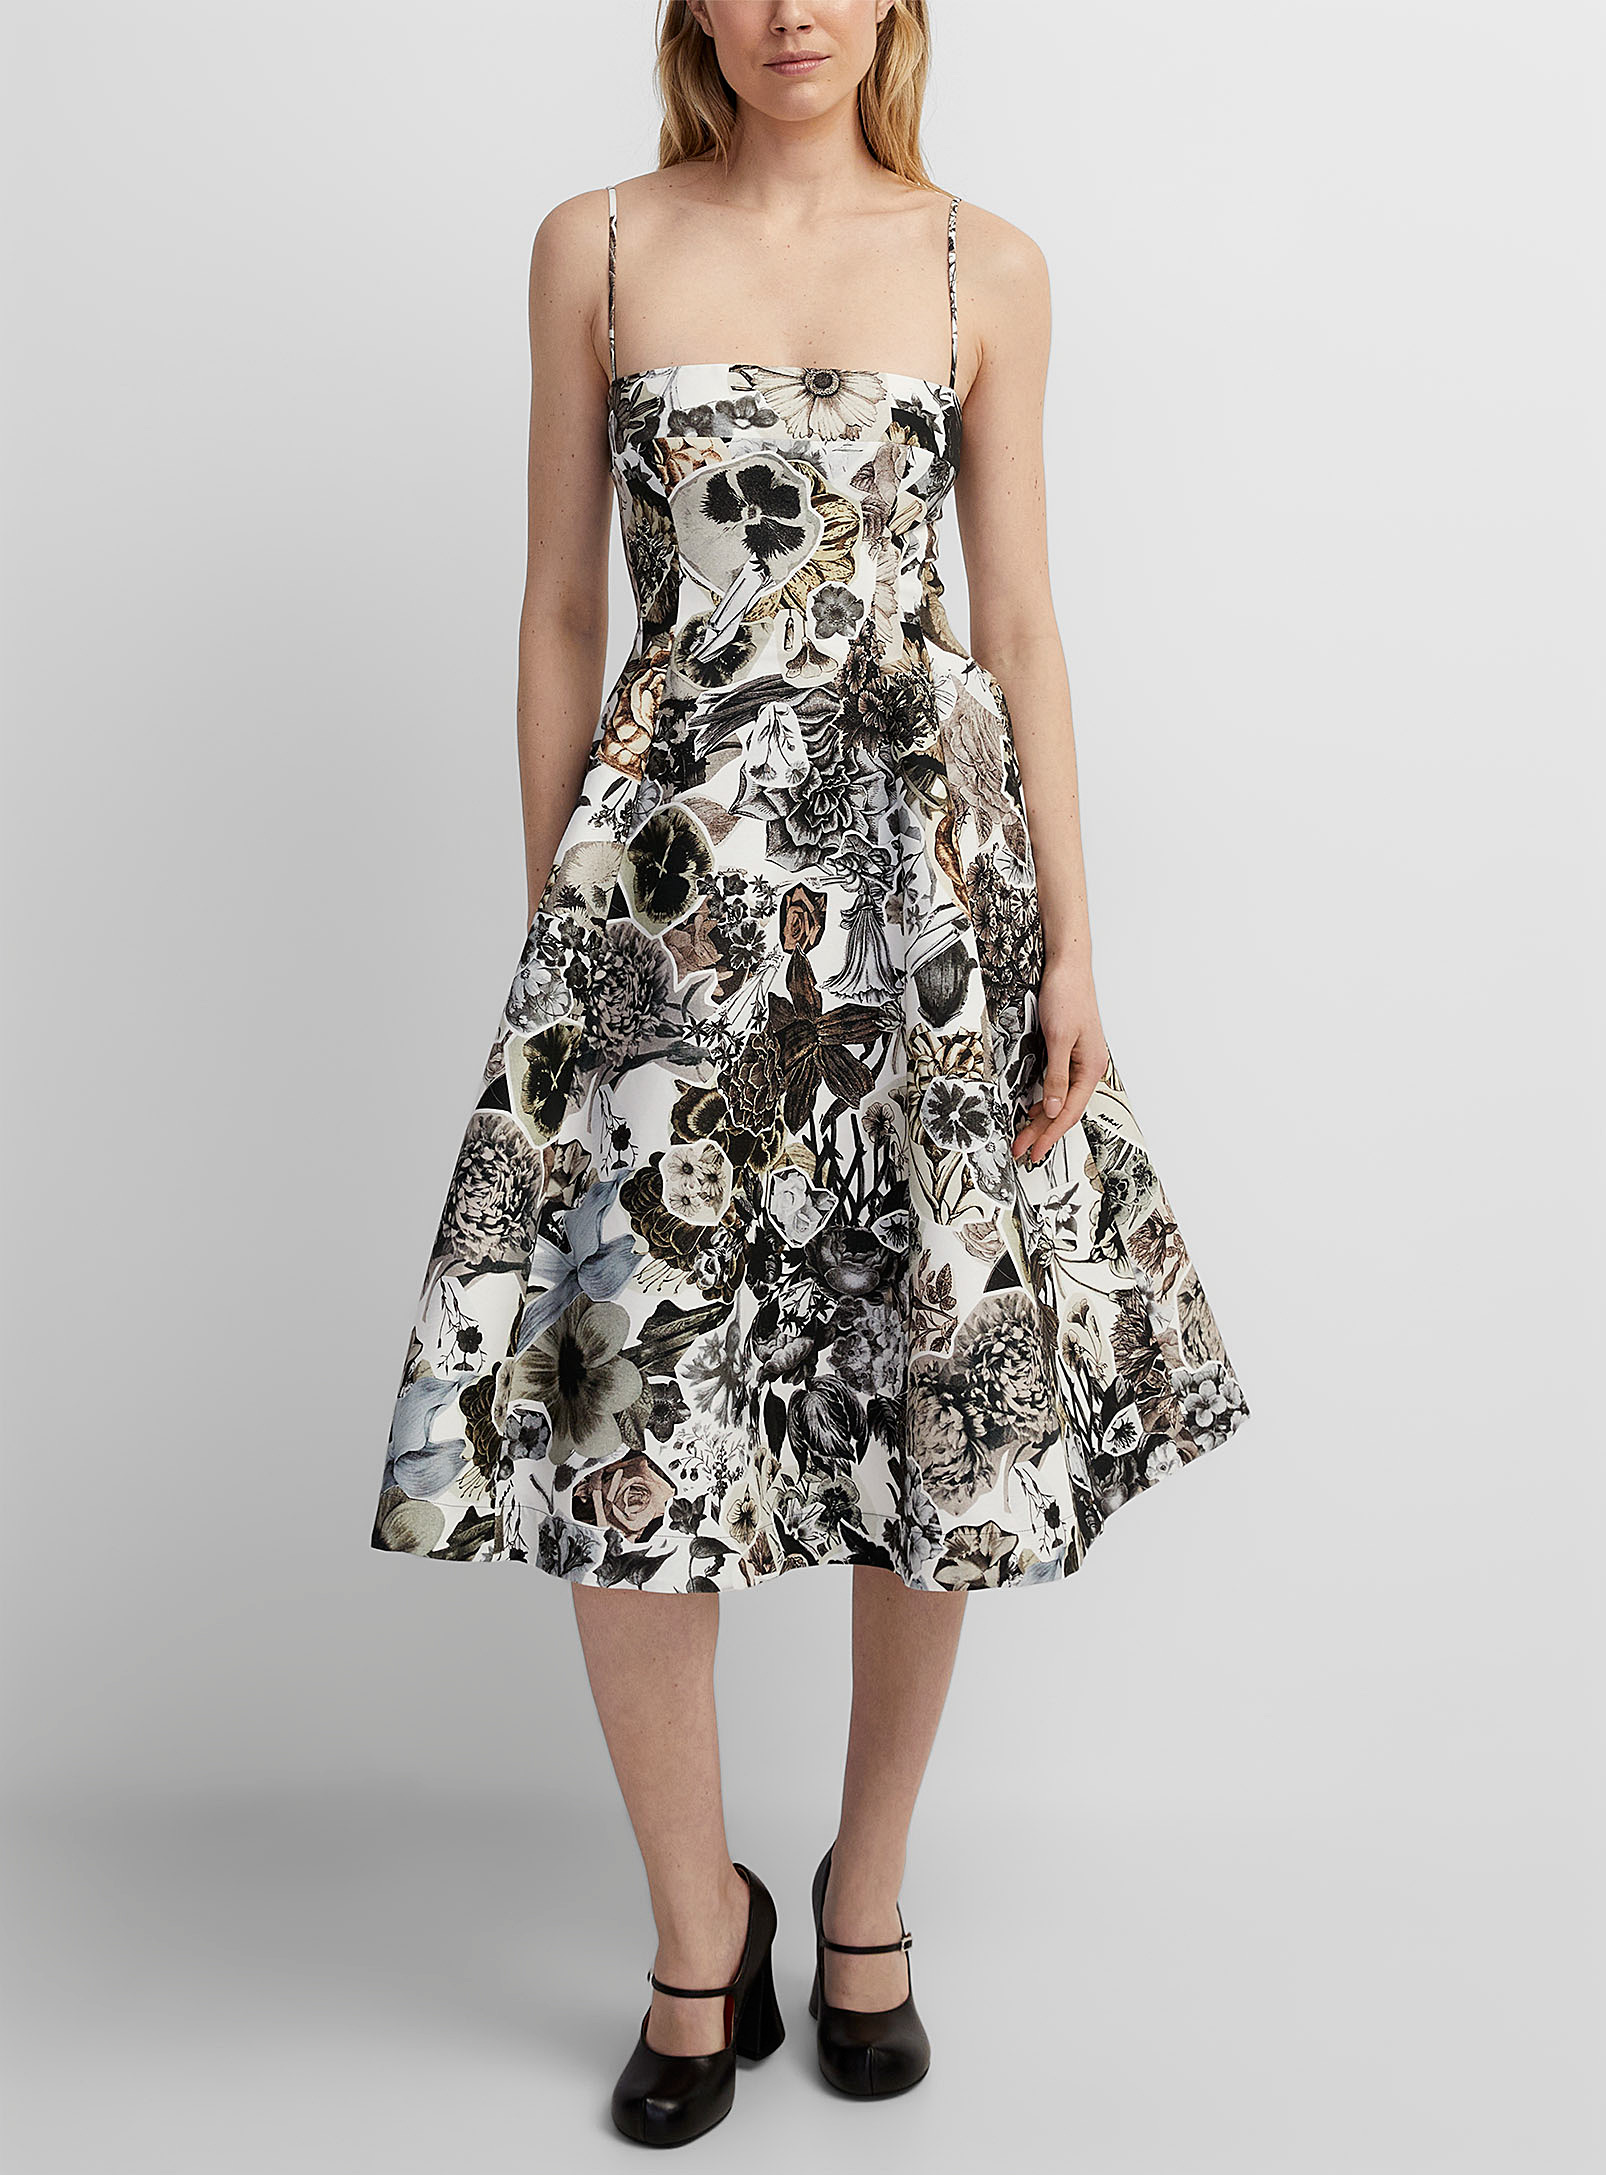 MARNI - Women's Floral tapestry flared dress